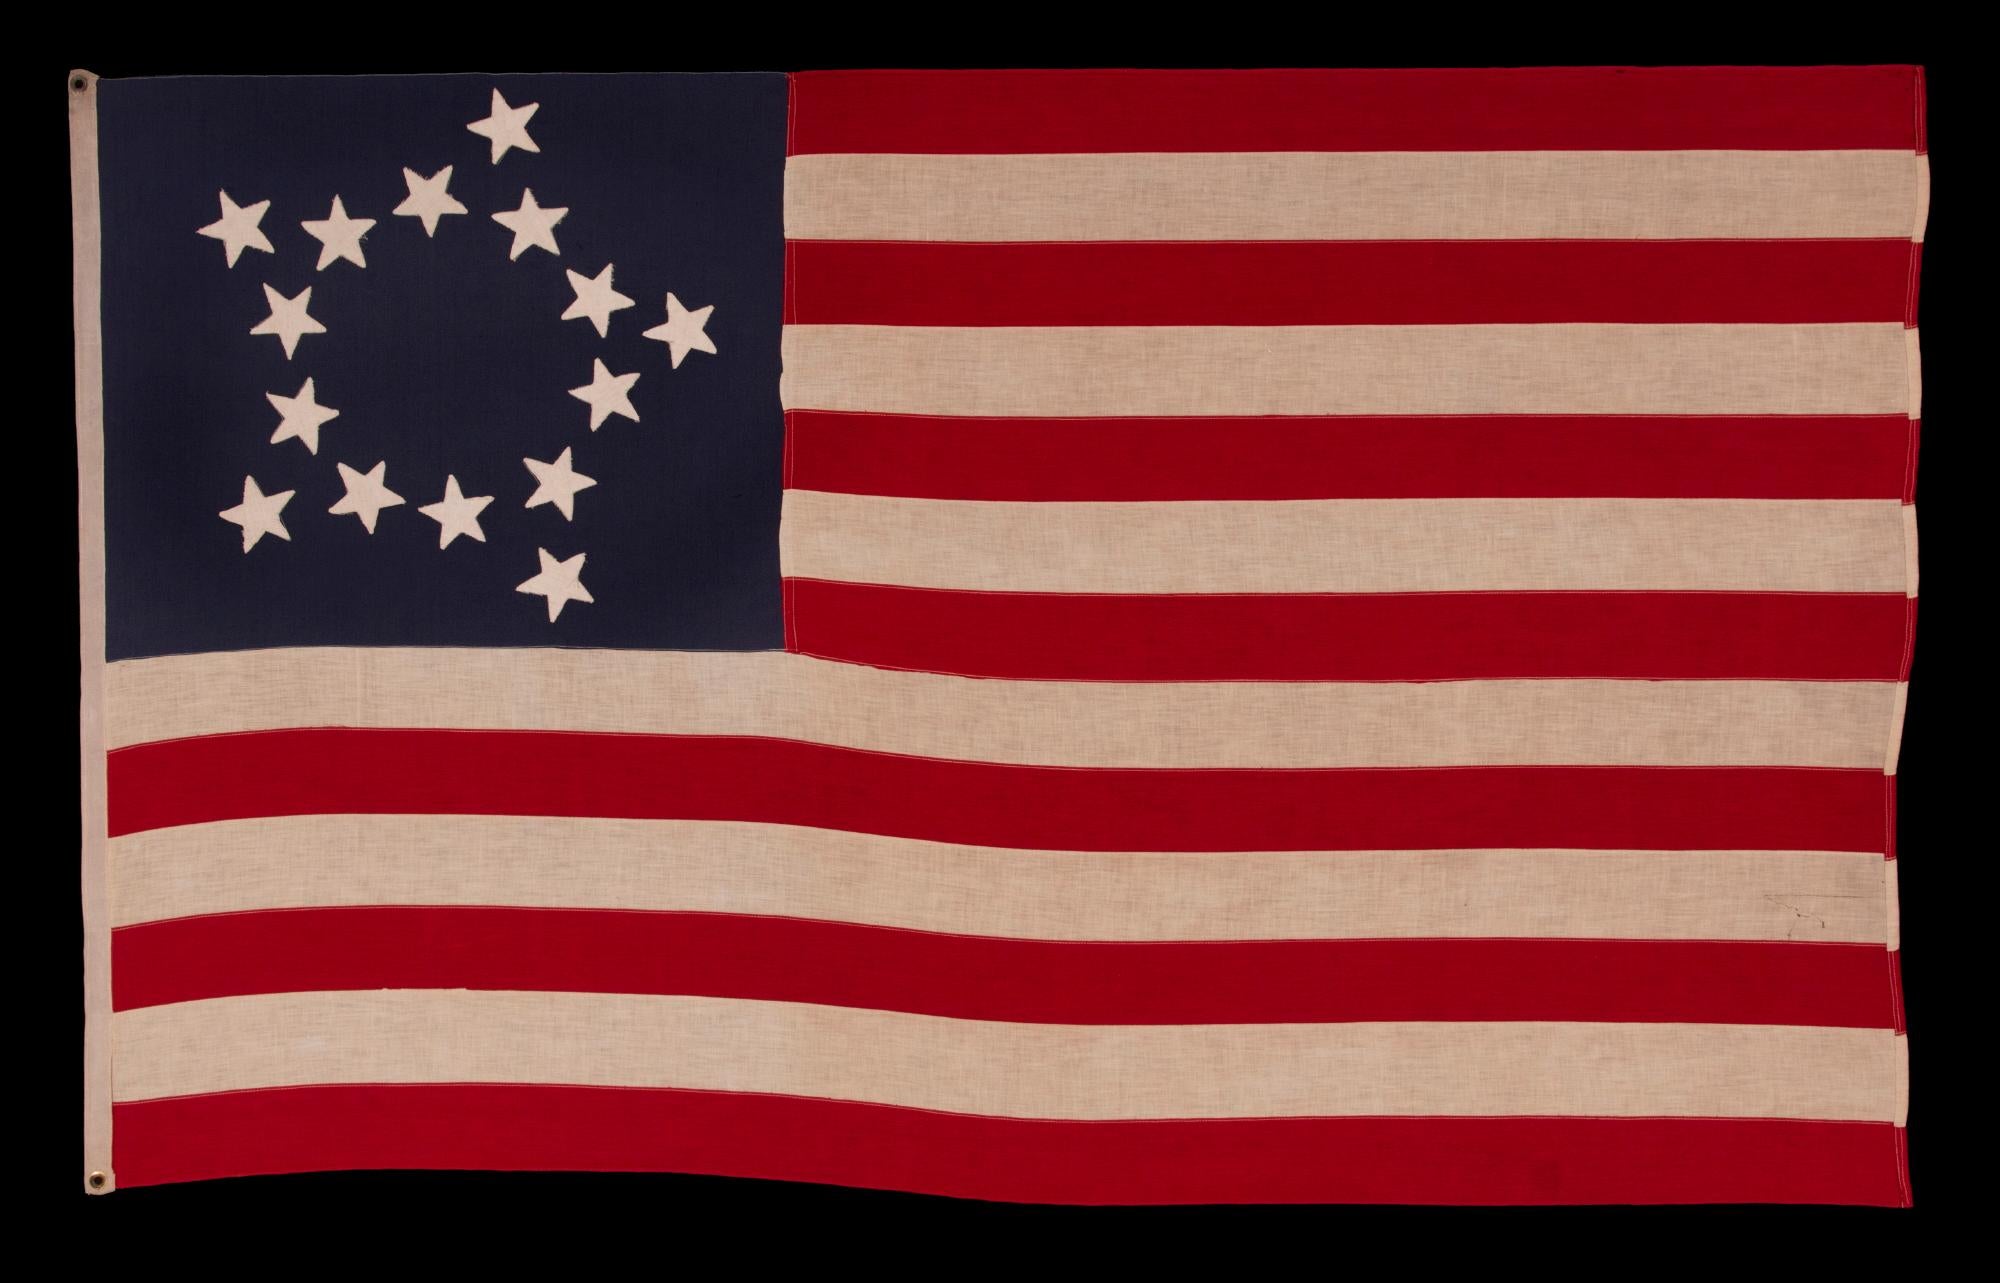 15 Star antique American flag with an extremely rare “circle-star” version of the great star pattern and a complement of 13 stripes; made during the 1st quarter of the 20th century to either celebrate Kentucky statehood, or to commemorate the war of